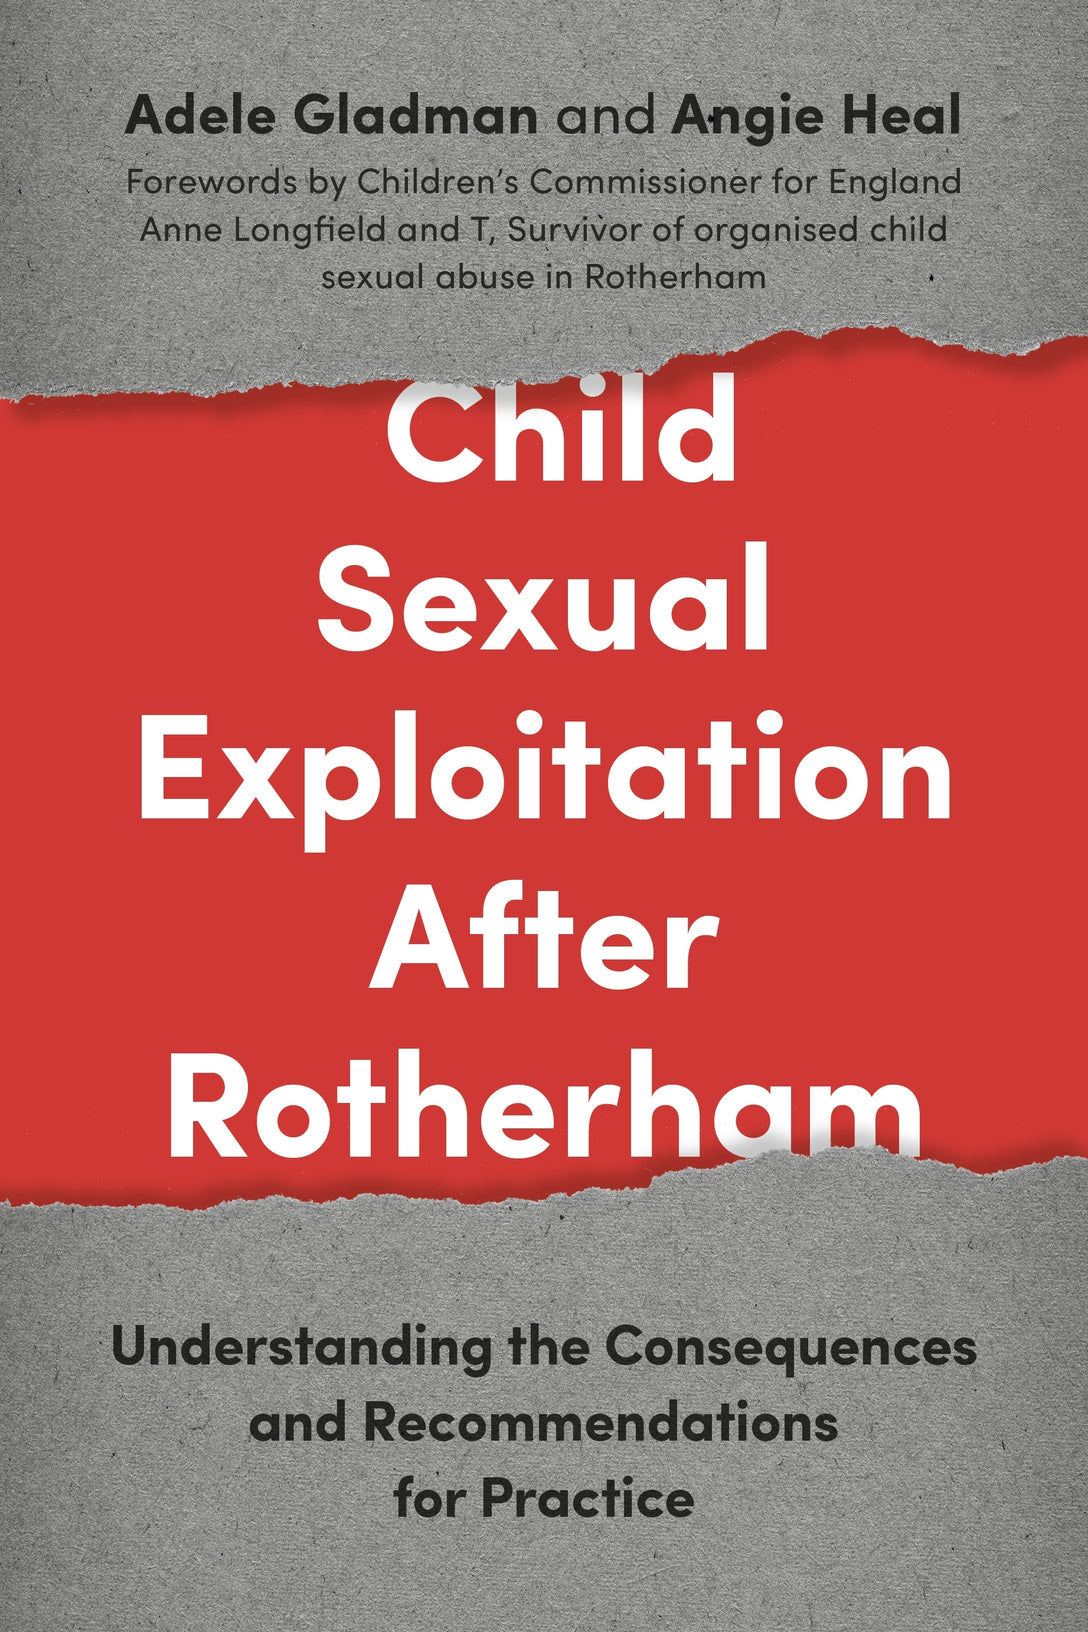 Child Sexual Exploitation After Rotherham by Angie Heal, Adele Gladman, Anne Longfield